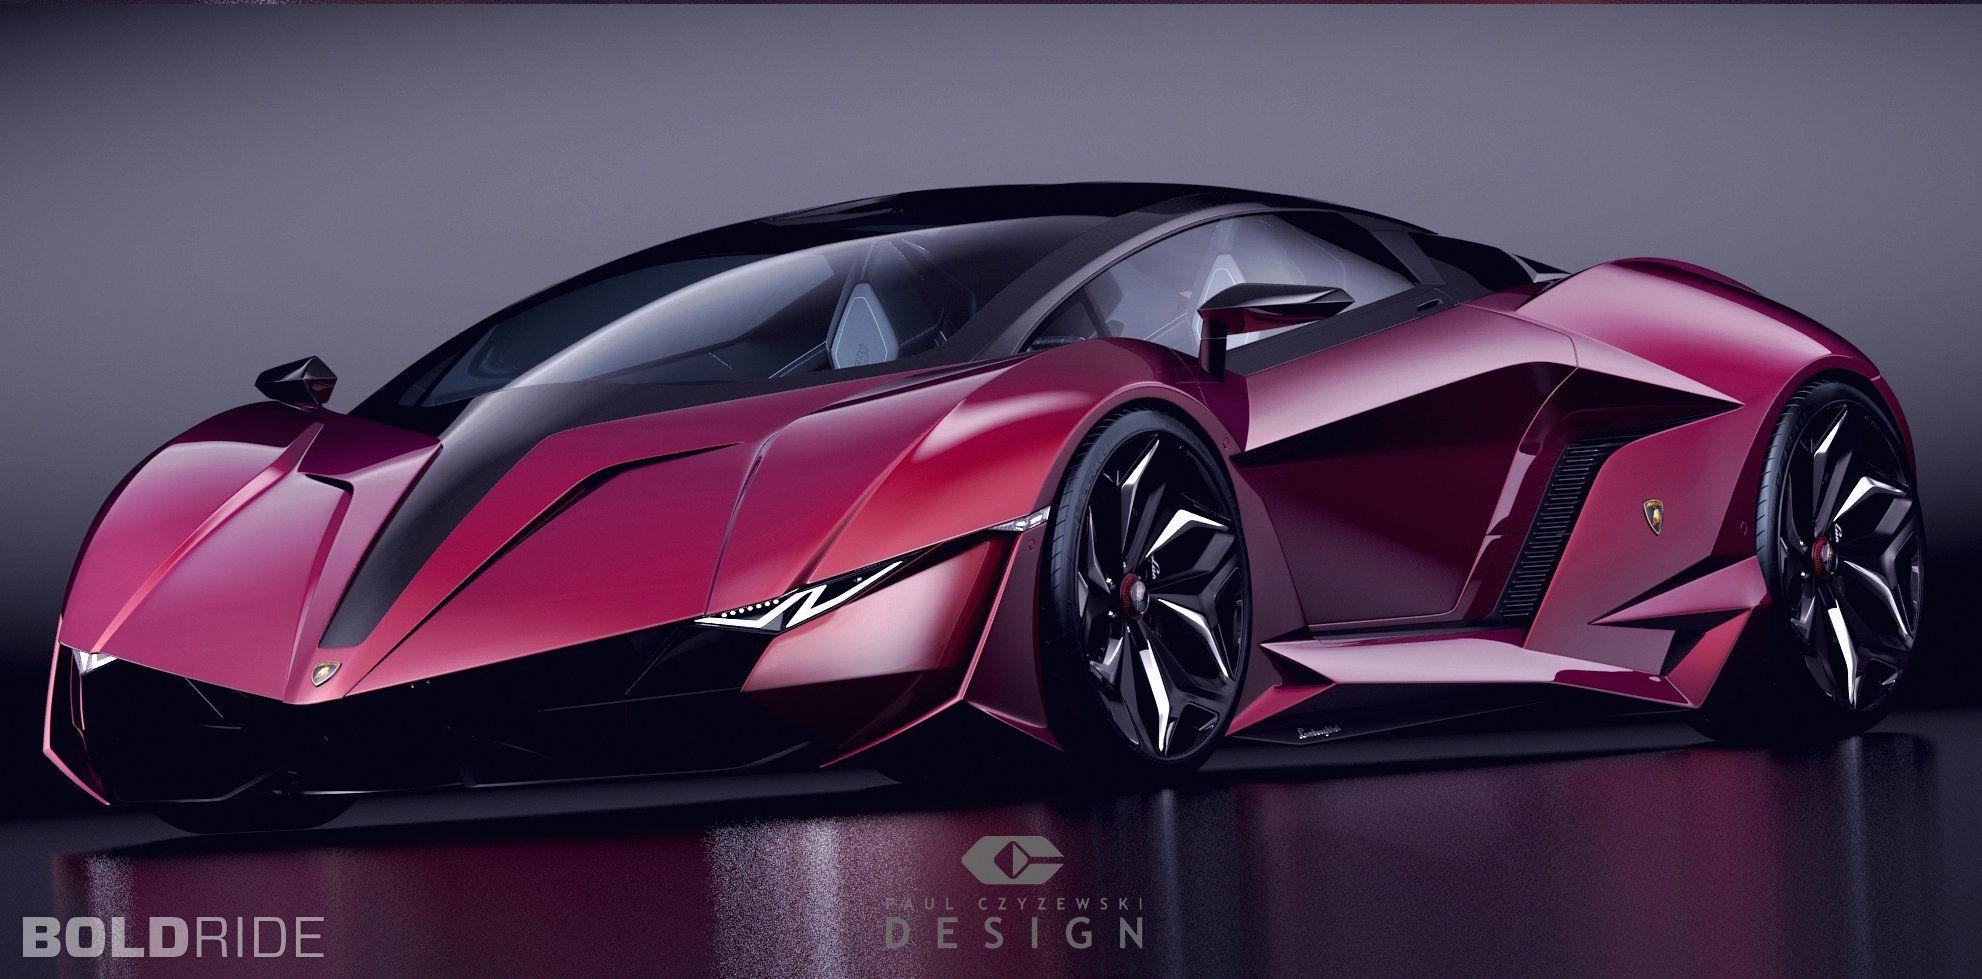 Concept Cars Wallpapers Top Free Concept Cars Backgrounds Images, Photos, Reviews